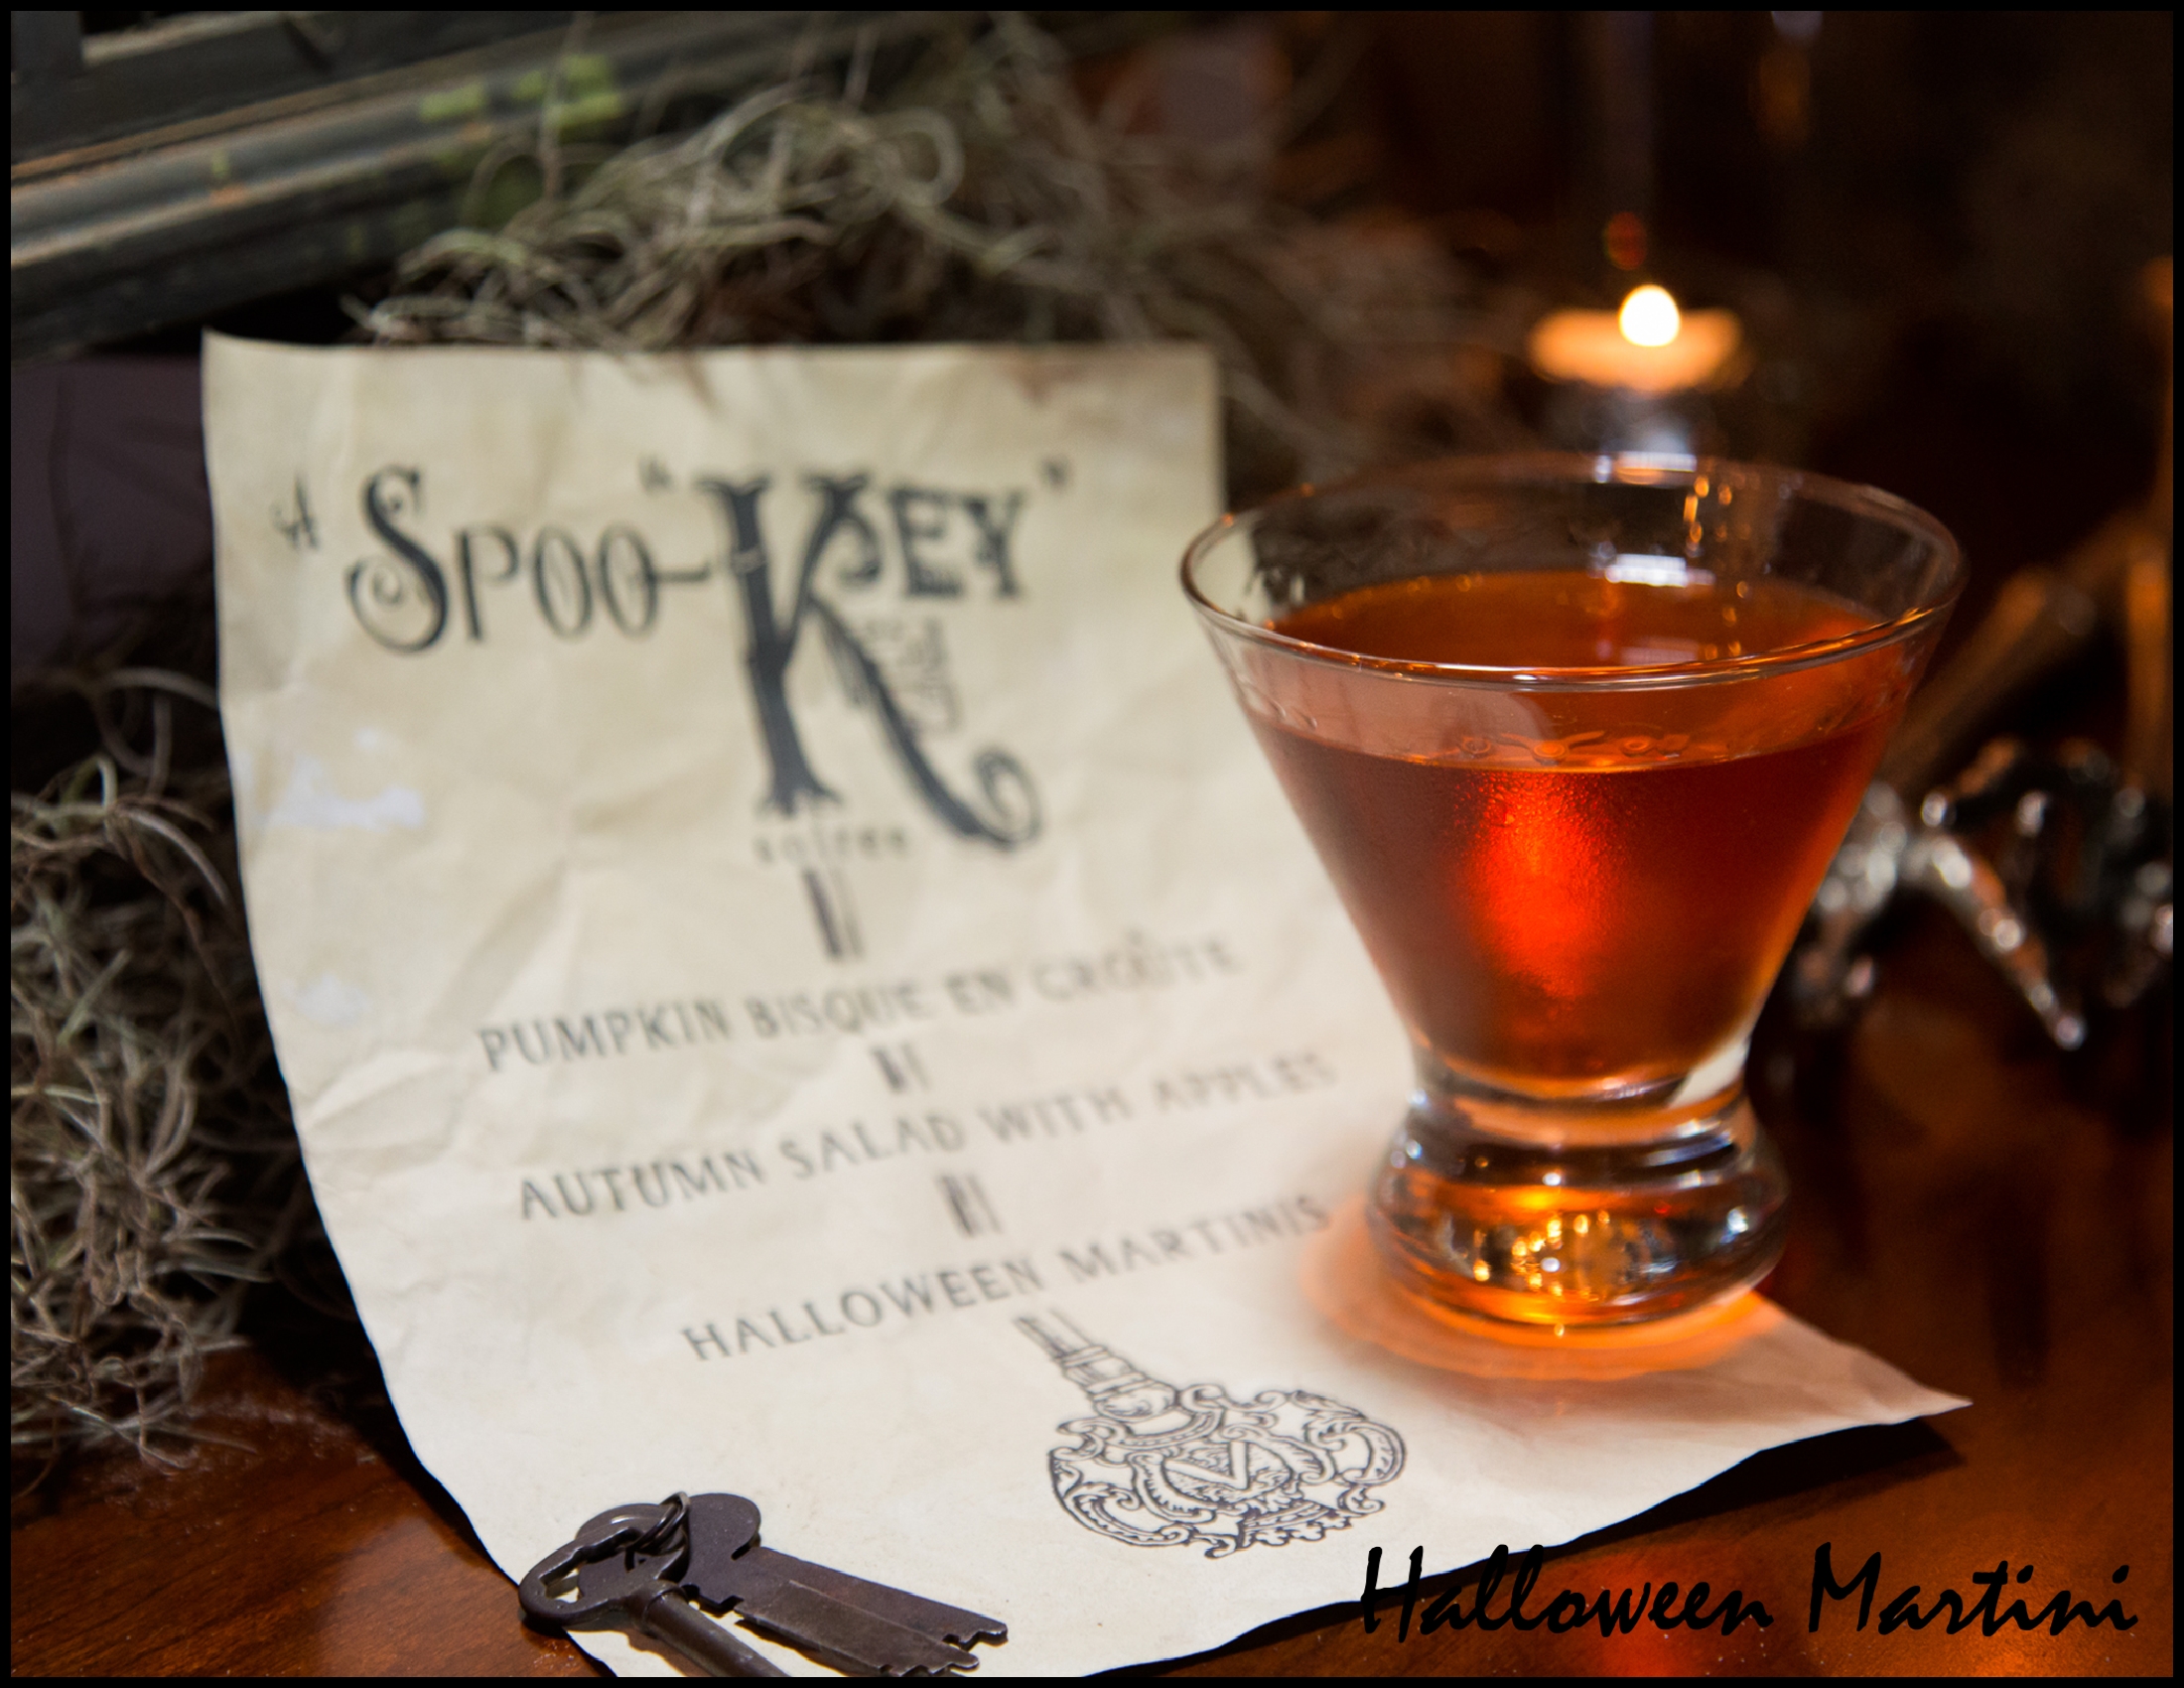 Halloween Martini (from the cookbook "Celebrate Everything!")